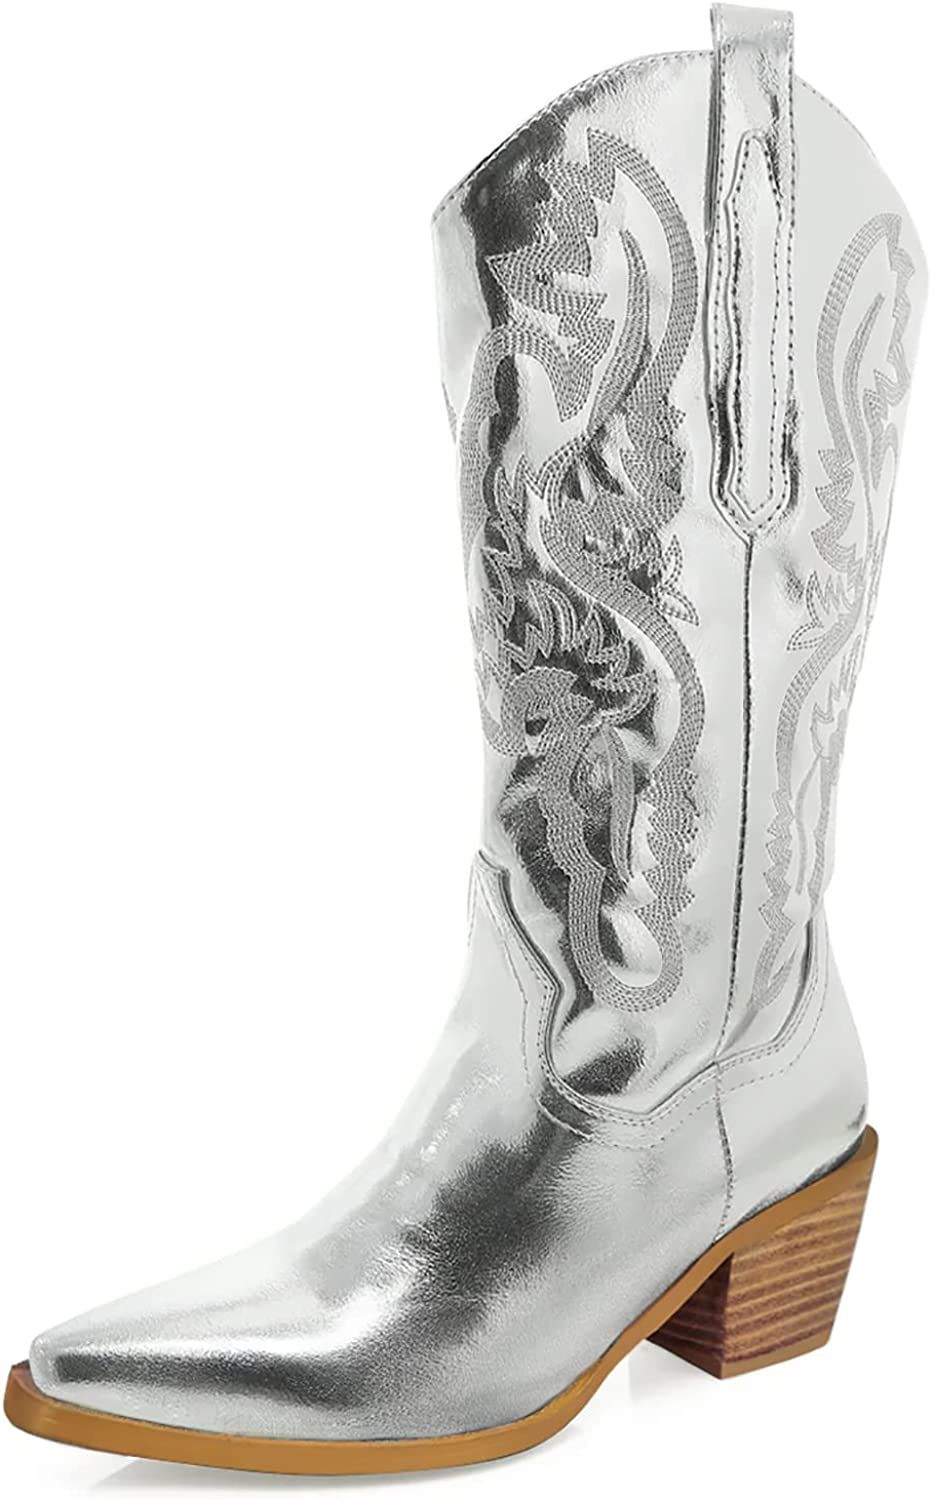 Women's Cowgirl Embroidered Mid-Calf Western Cowboy Boots, Pointed Toe Block Chunky Medium Heel 6... | Amazon (US)